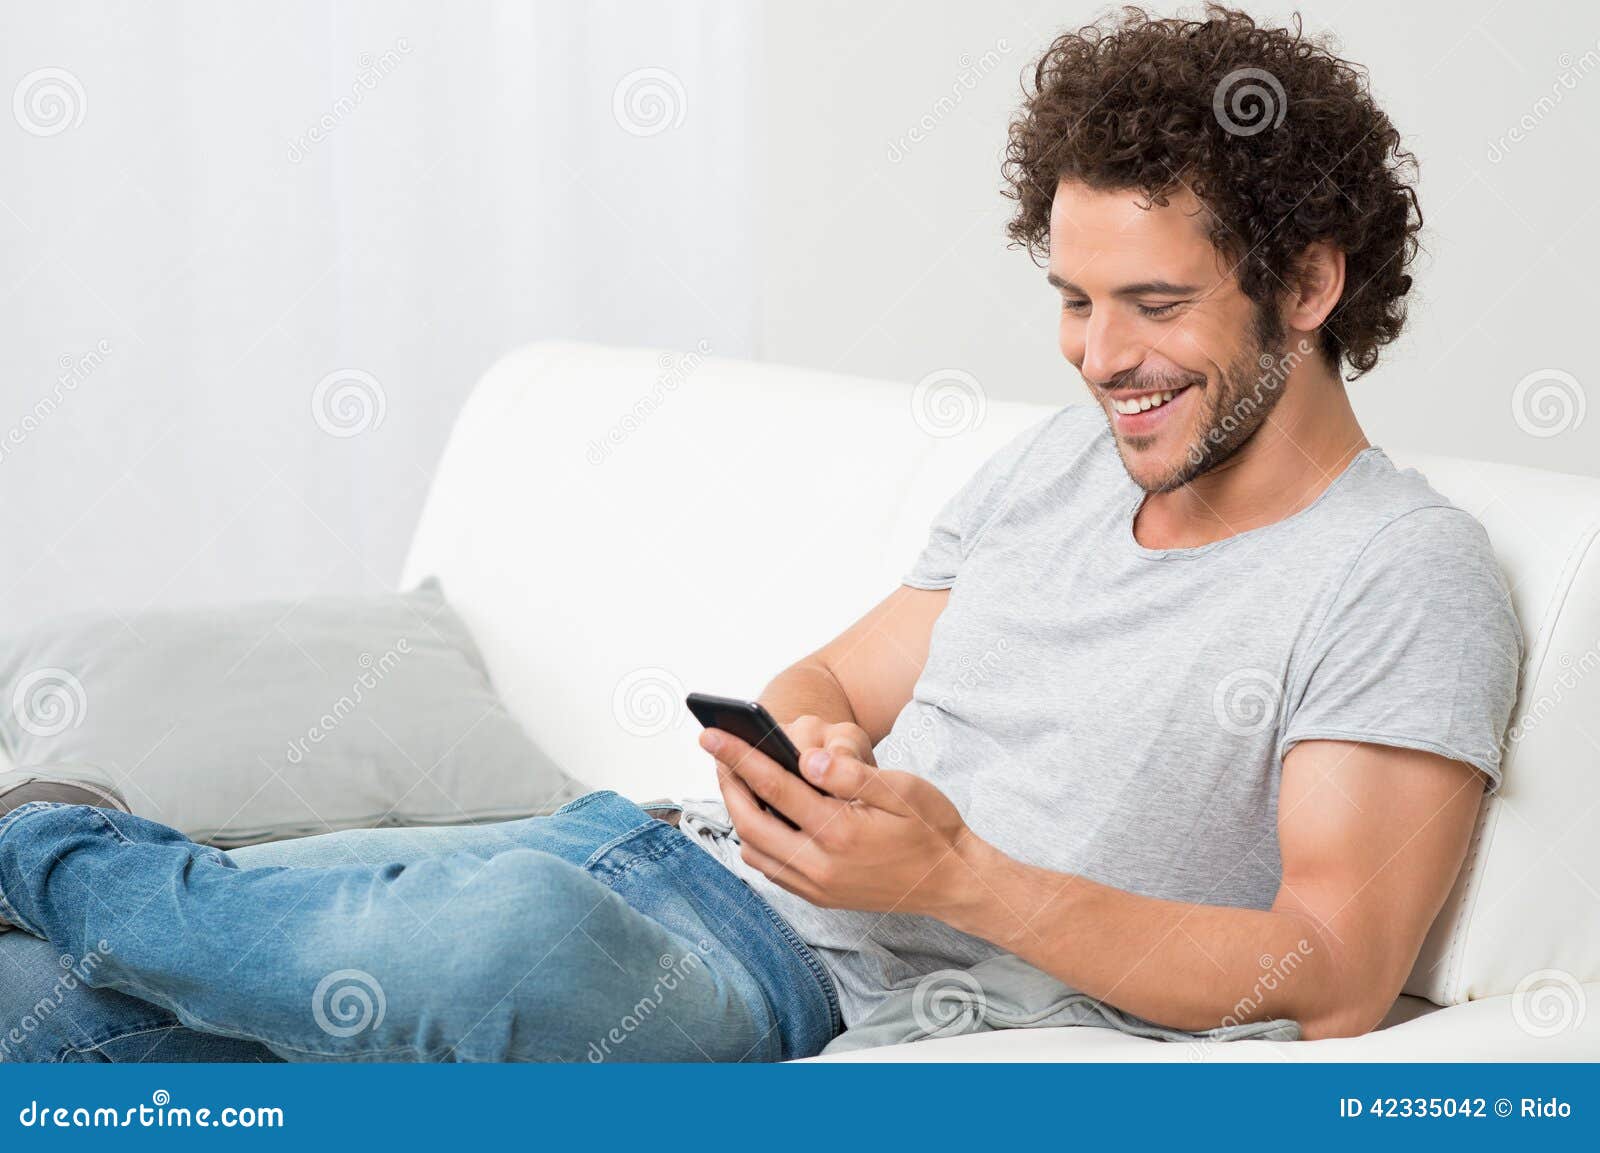 smiling young man holding cellphone